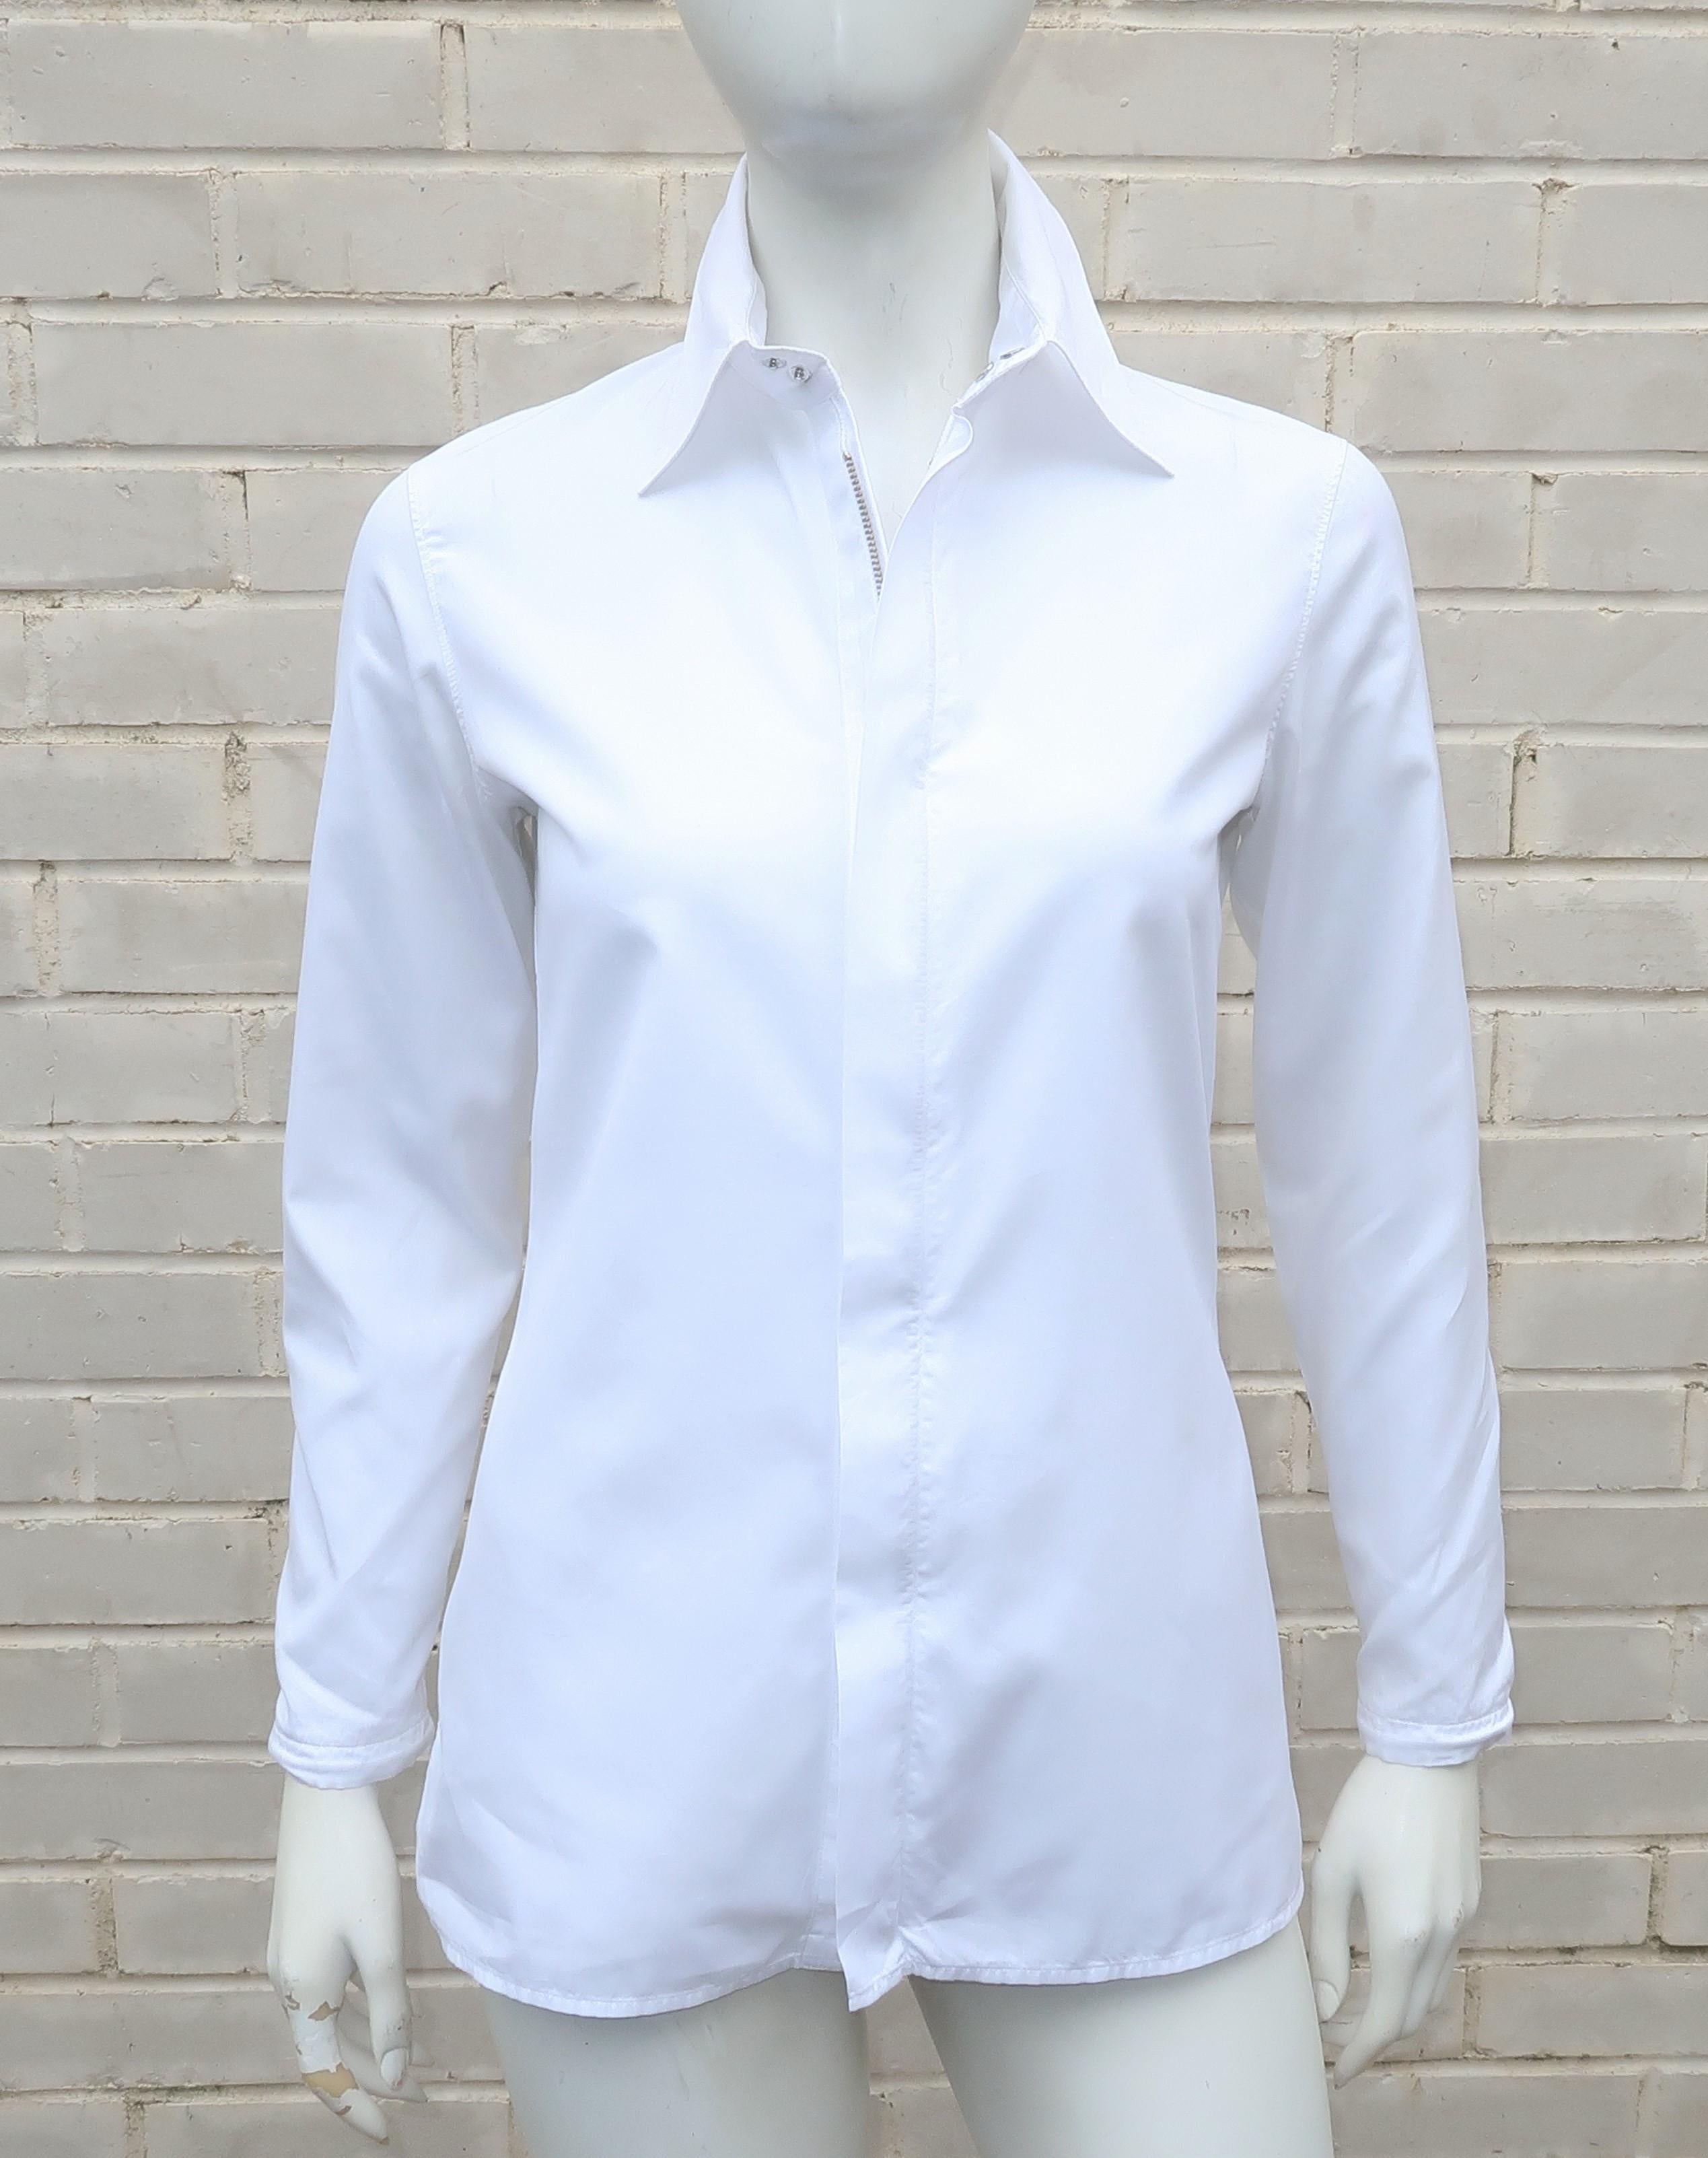 Jean Paul Gaultier White Shirt With Black Leather Restraint Cuffs  4